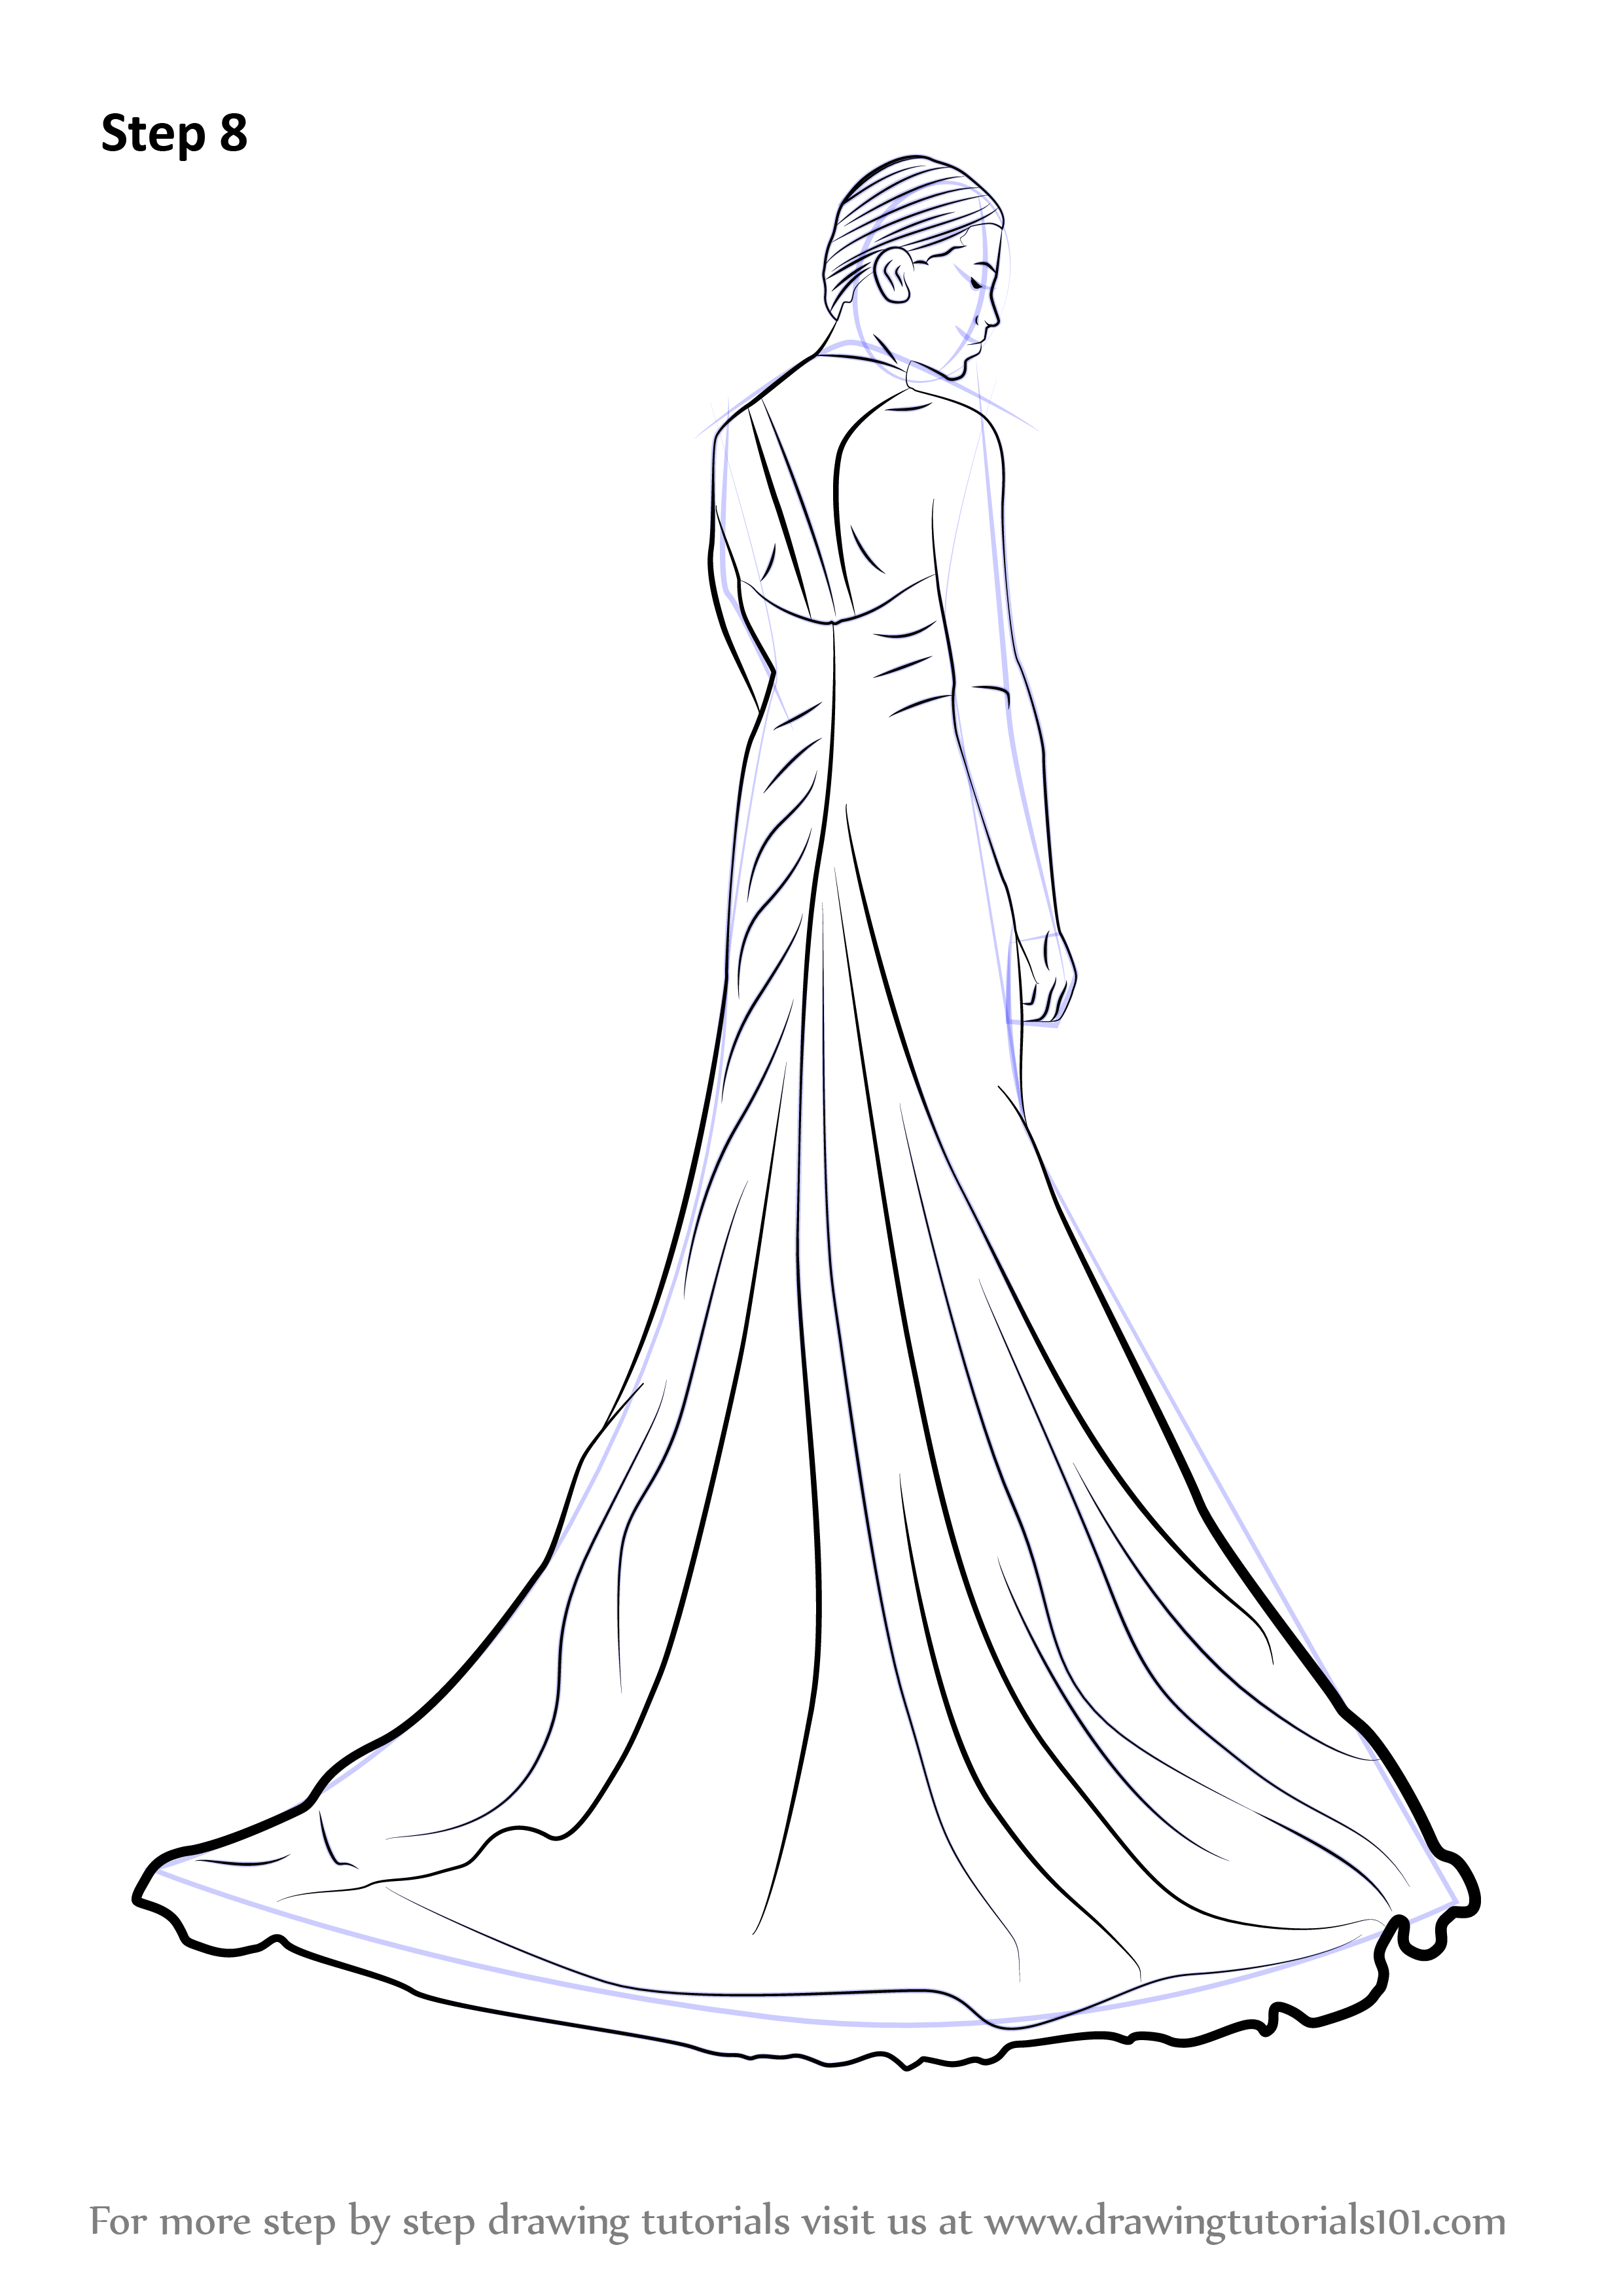 How to Draw a Bridal Gown (Fashion) Step by Step